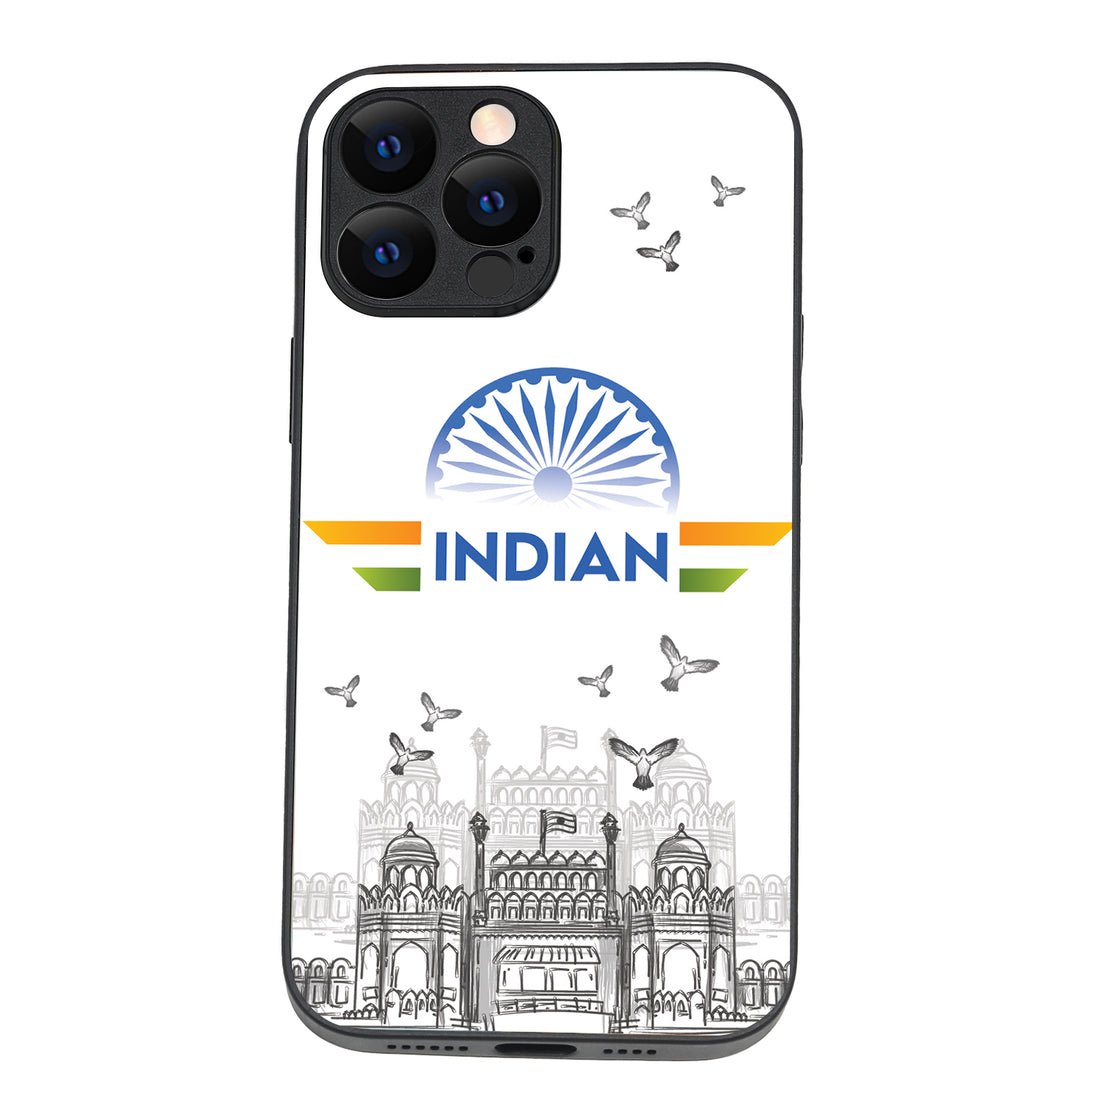 Indian iPhone 13 Pro Max Case